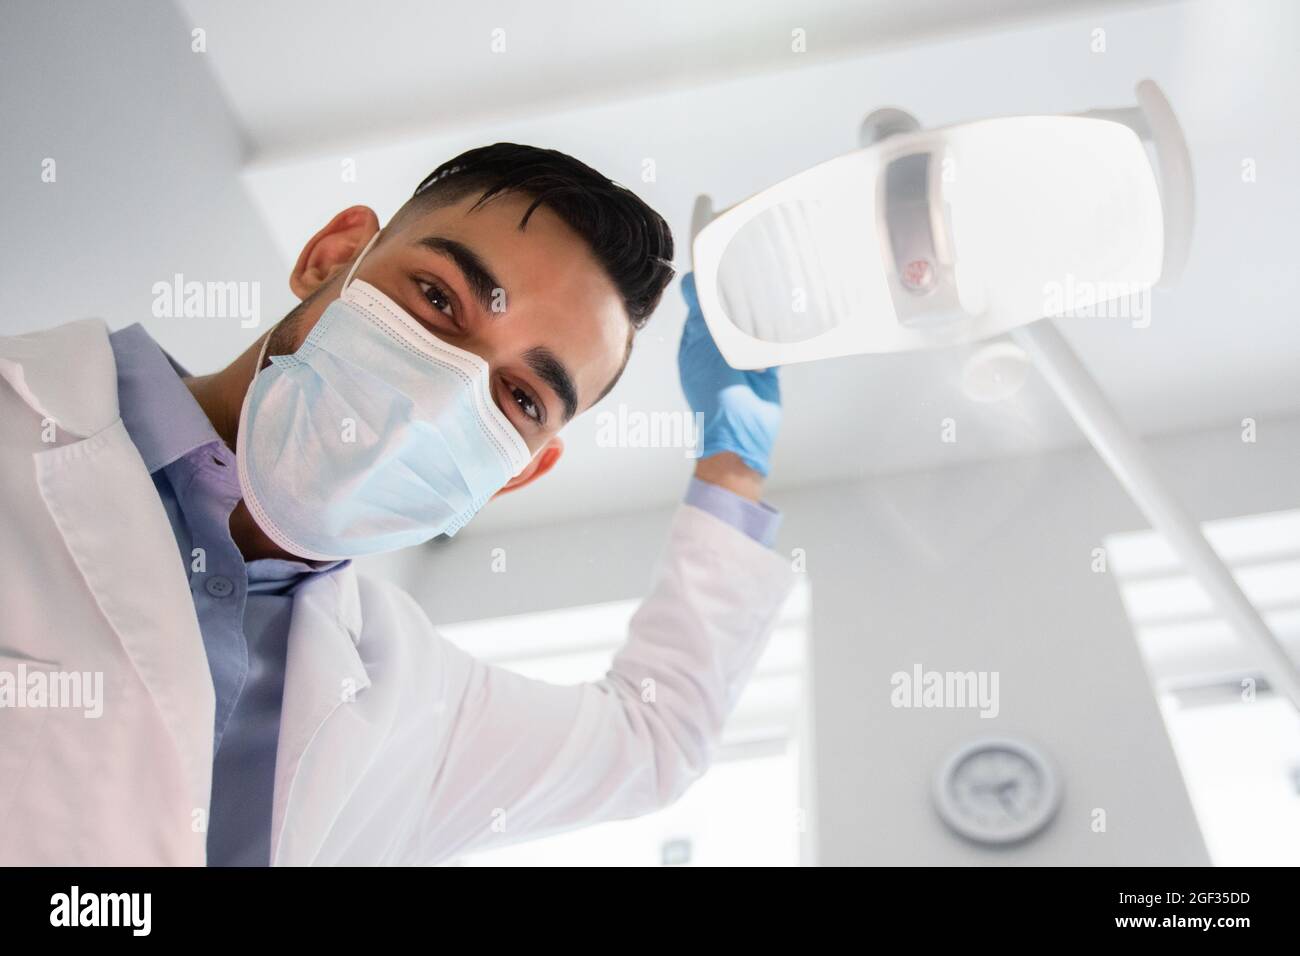 Arab Dentist Turning On Lamp Before Check Up With Patient, Low Angle Stock Photo